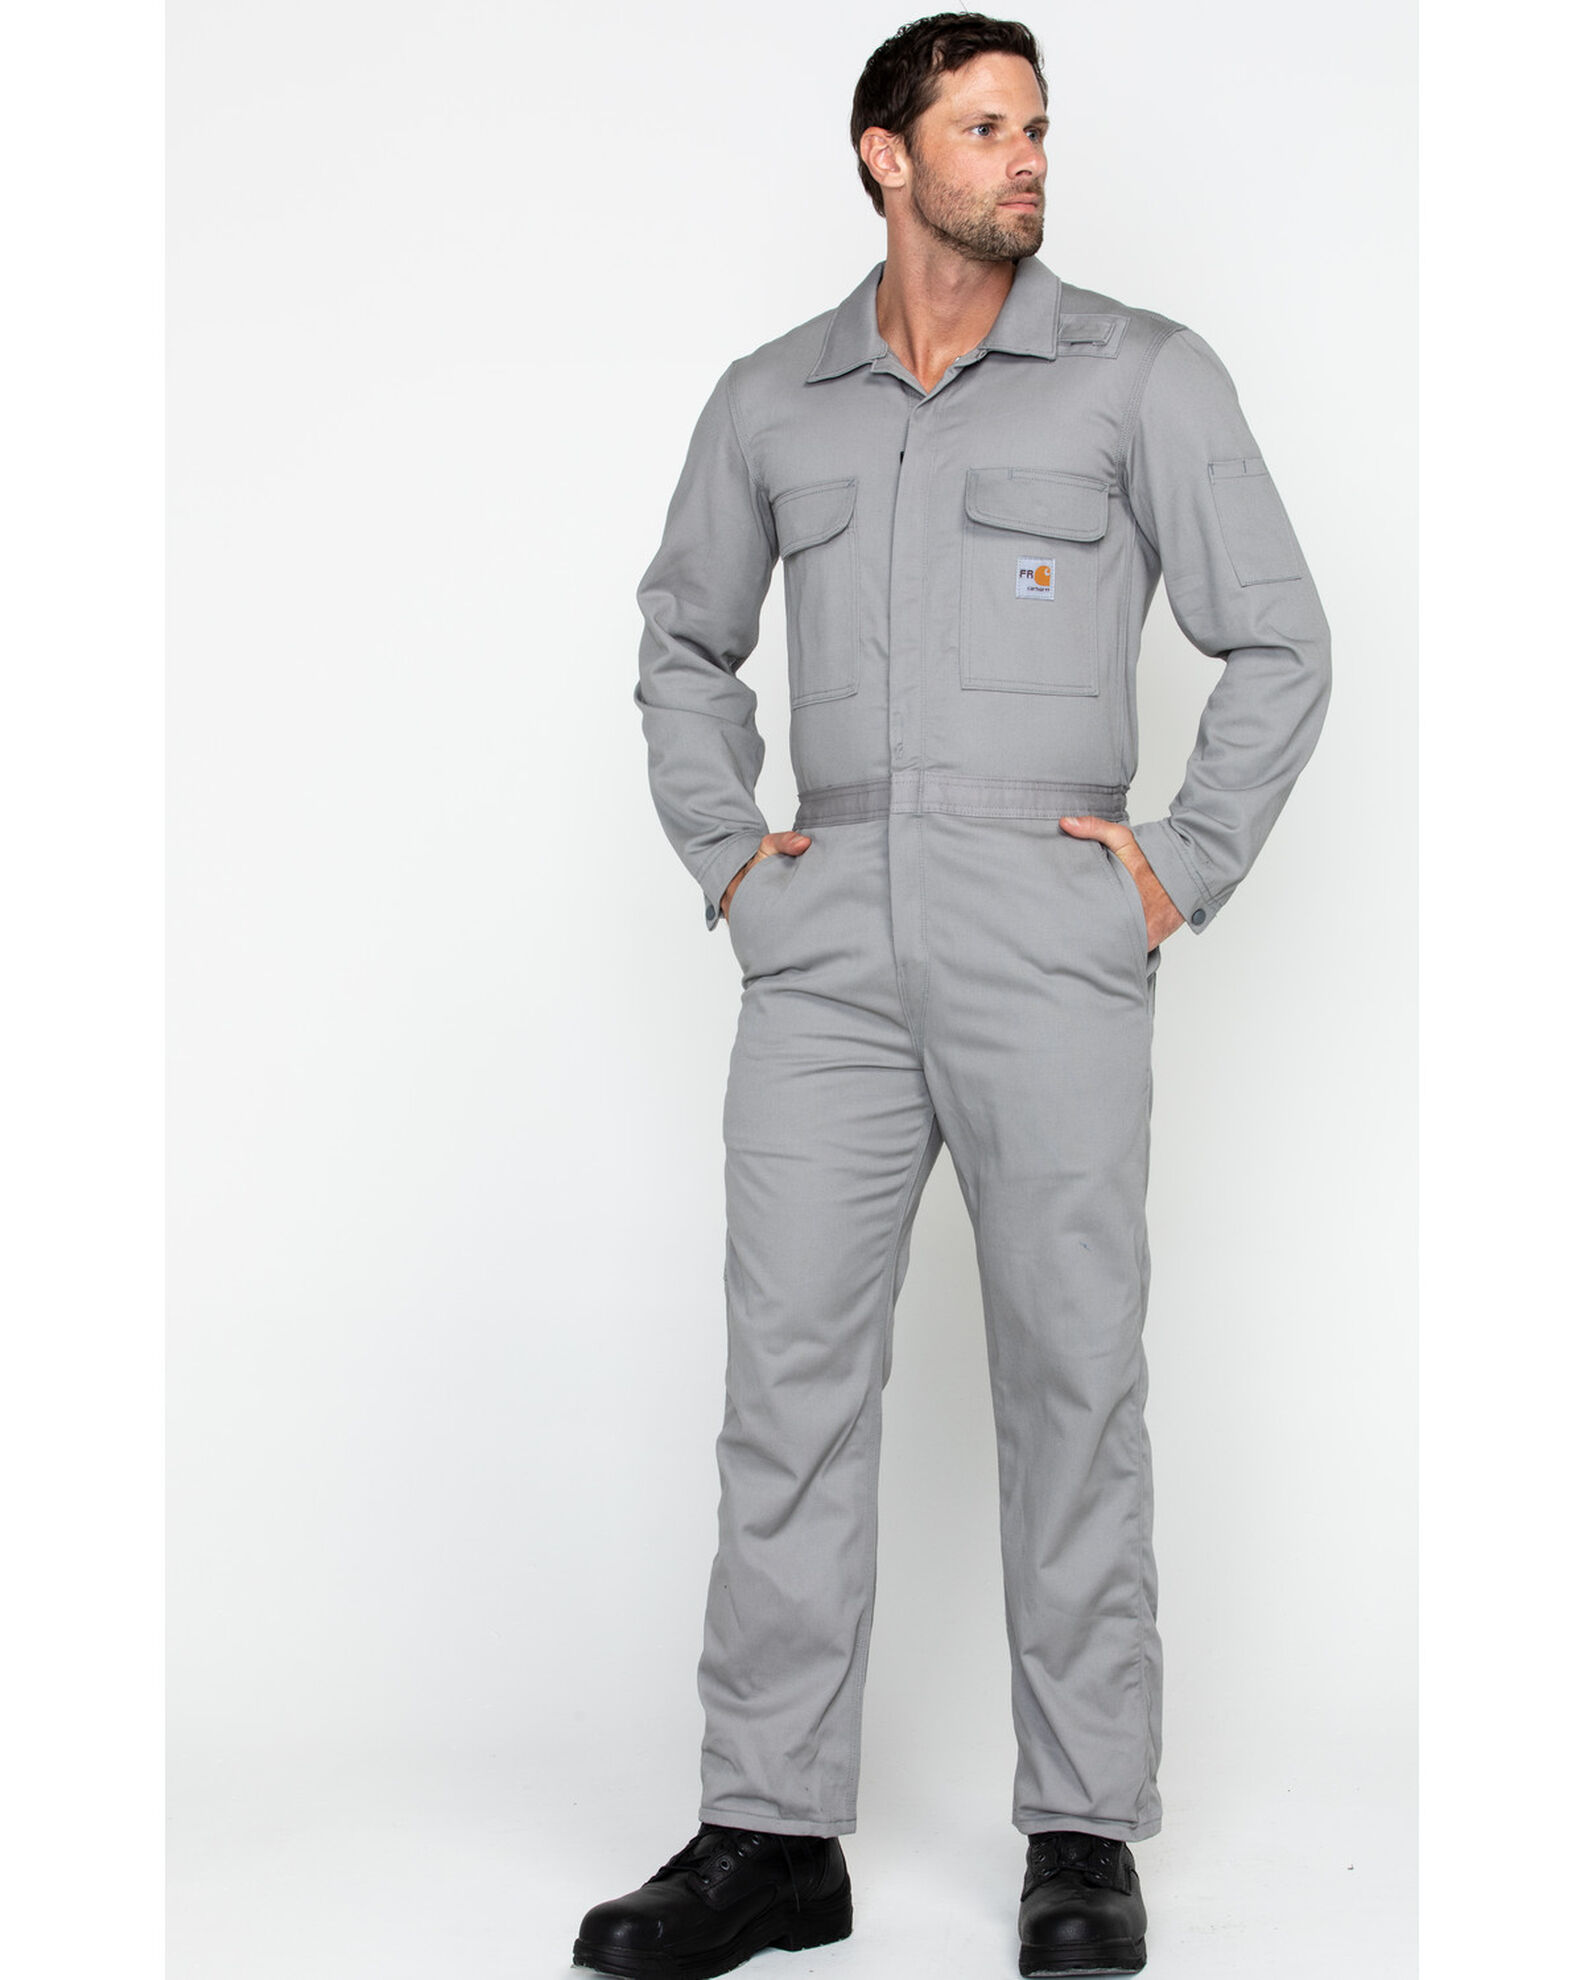 Carhartt Men's Flame Resistant Traditional Twill Coverall,gray,44